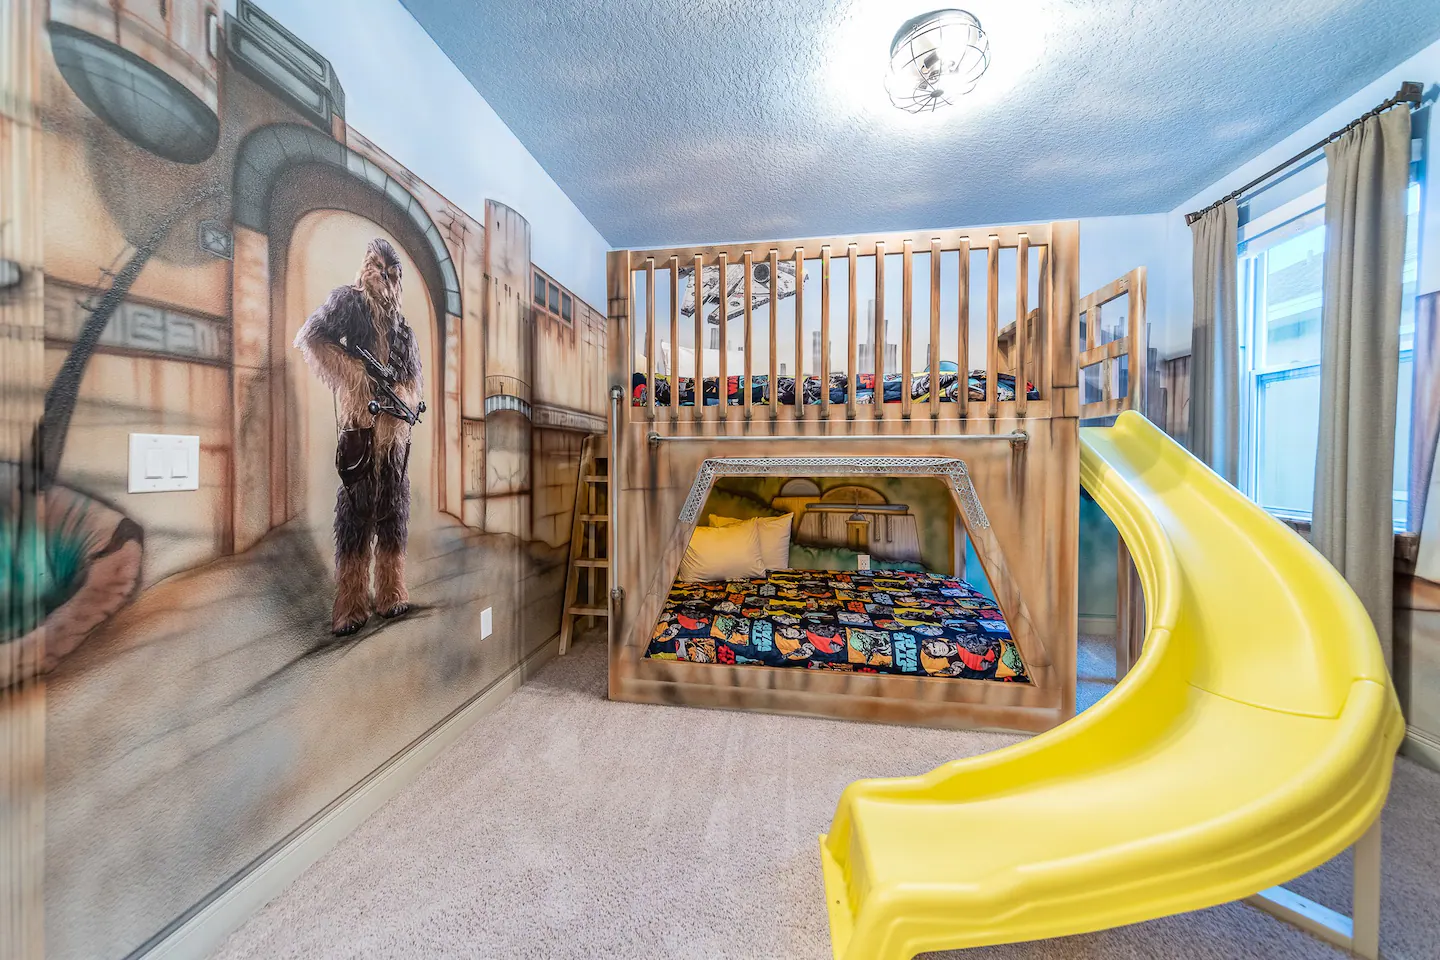 The kids will surely love this bedroom